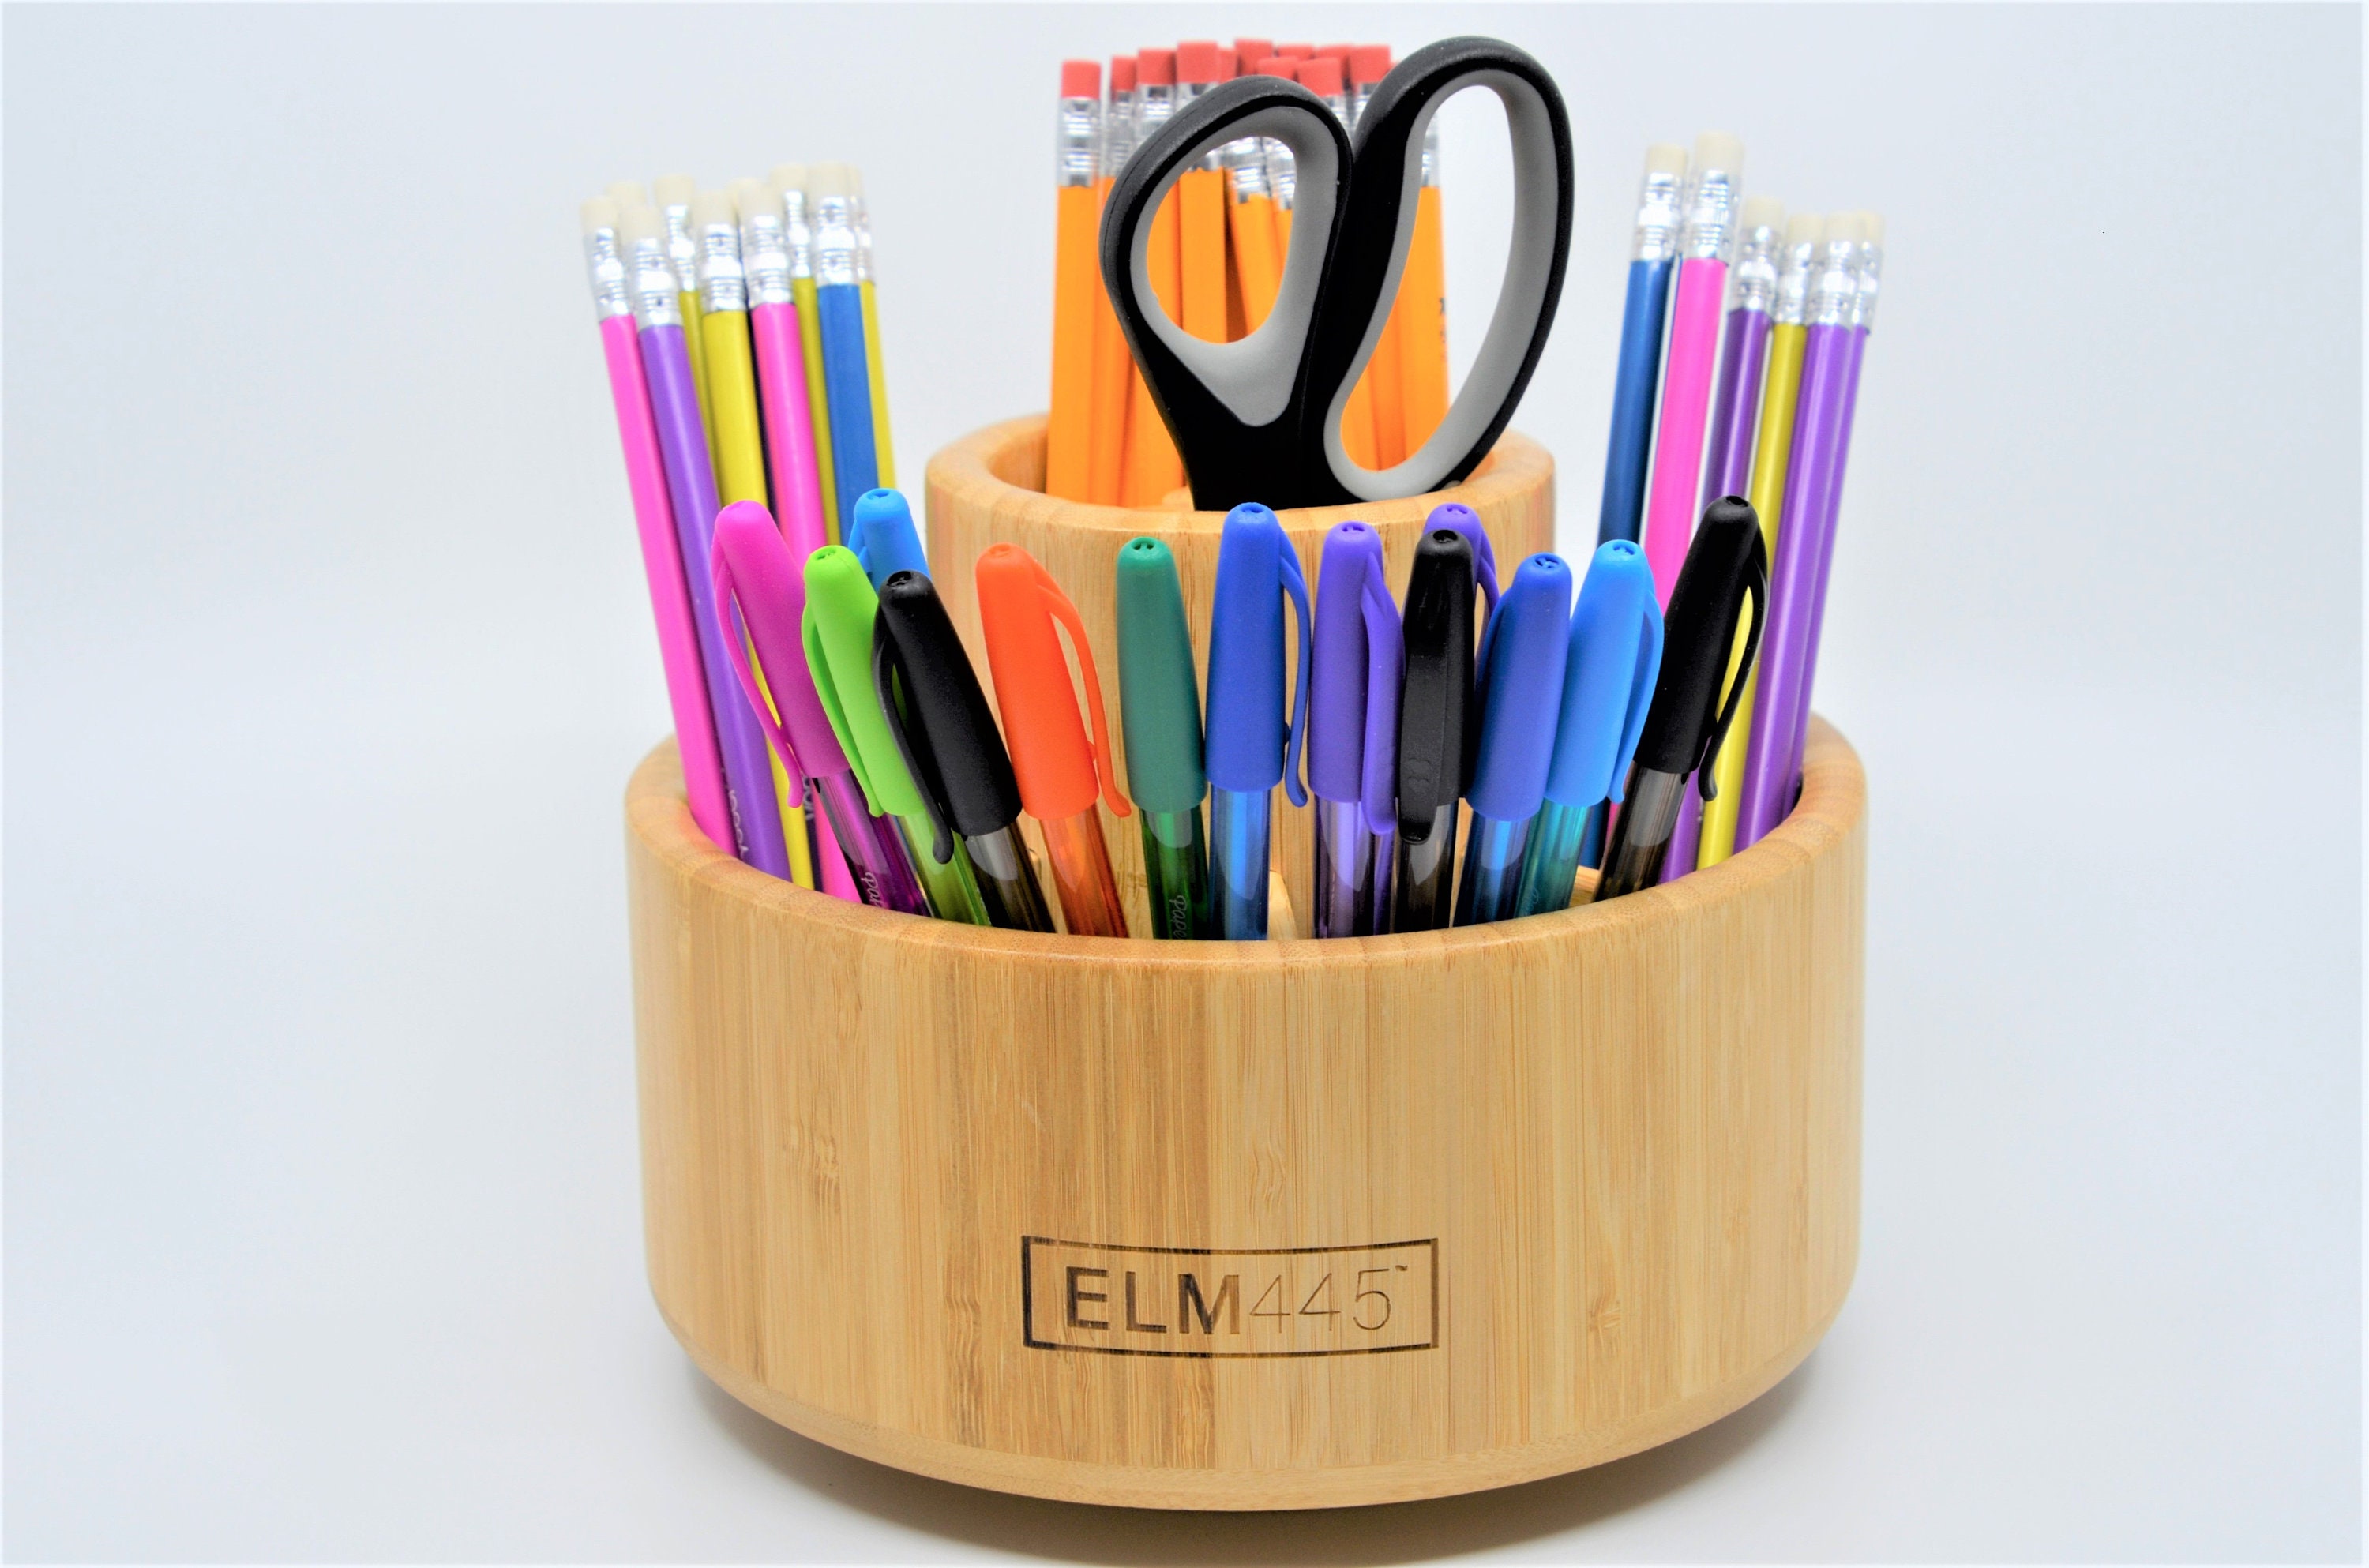 Personalized Wood Desk Organizer Holder. Custom Wood Pencil Caddy Storage.  Corporate Gifts, Client Gifts. 